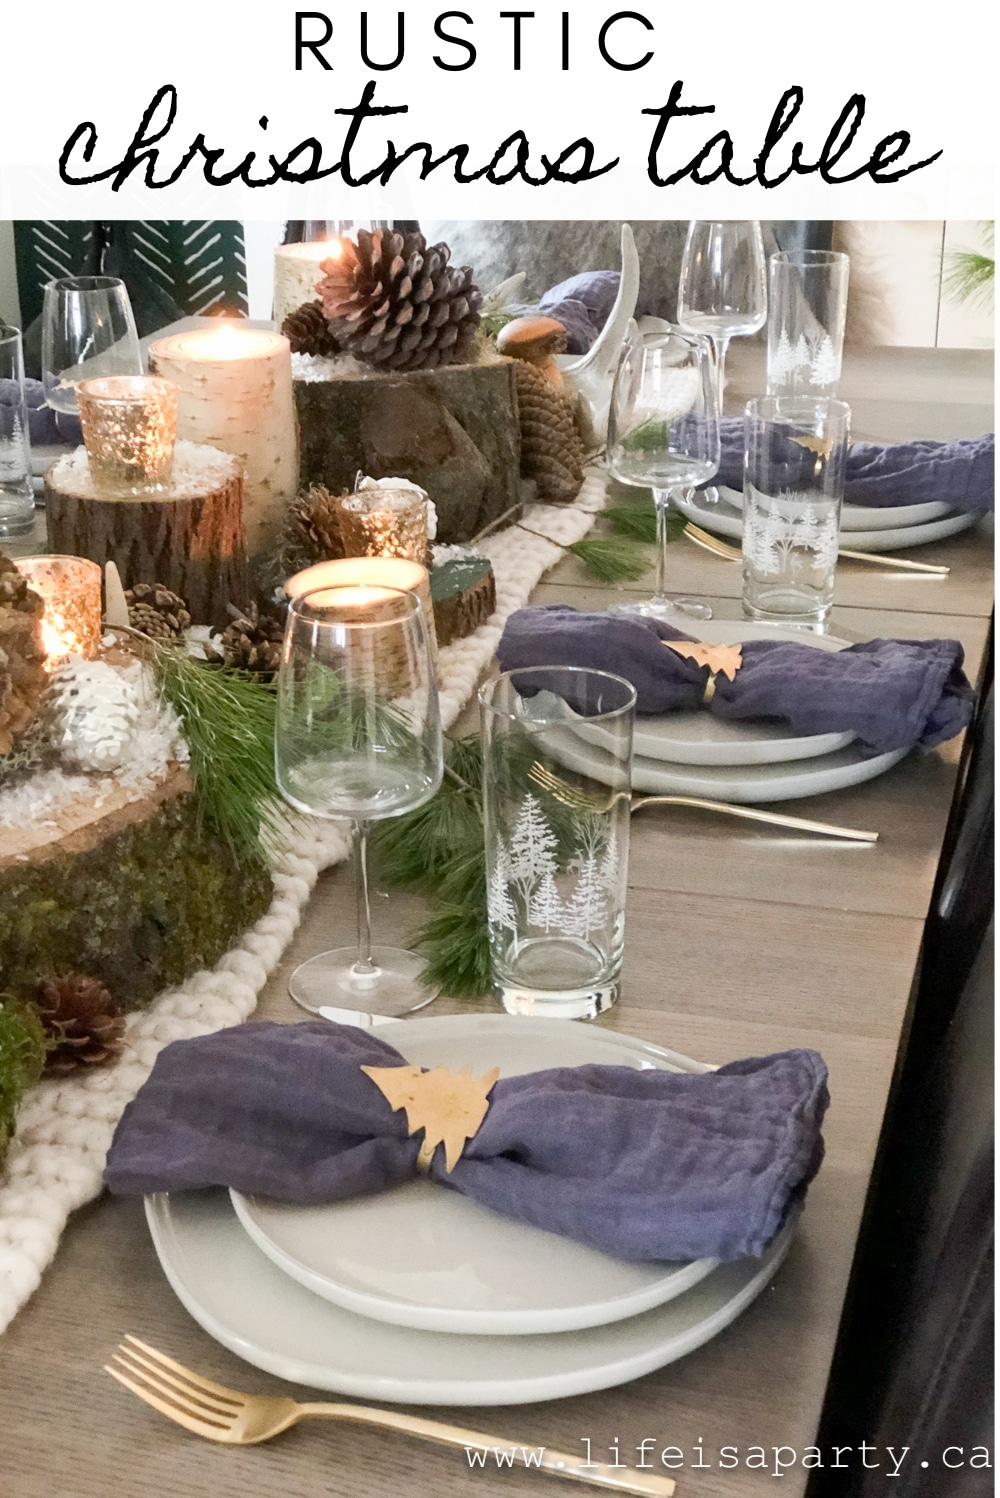 Rustic Christmas Table Decor: wood pieces make a rustic centrepiece with pinecones, candles, and faux snow for a little Christmas magic.